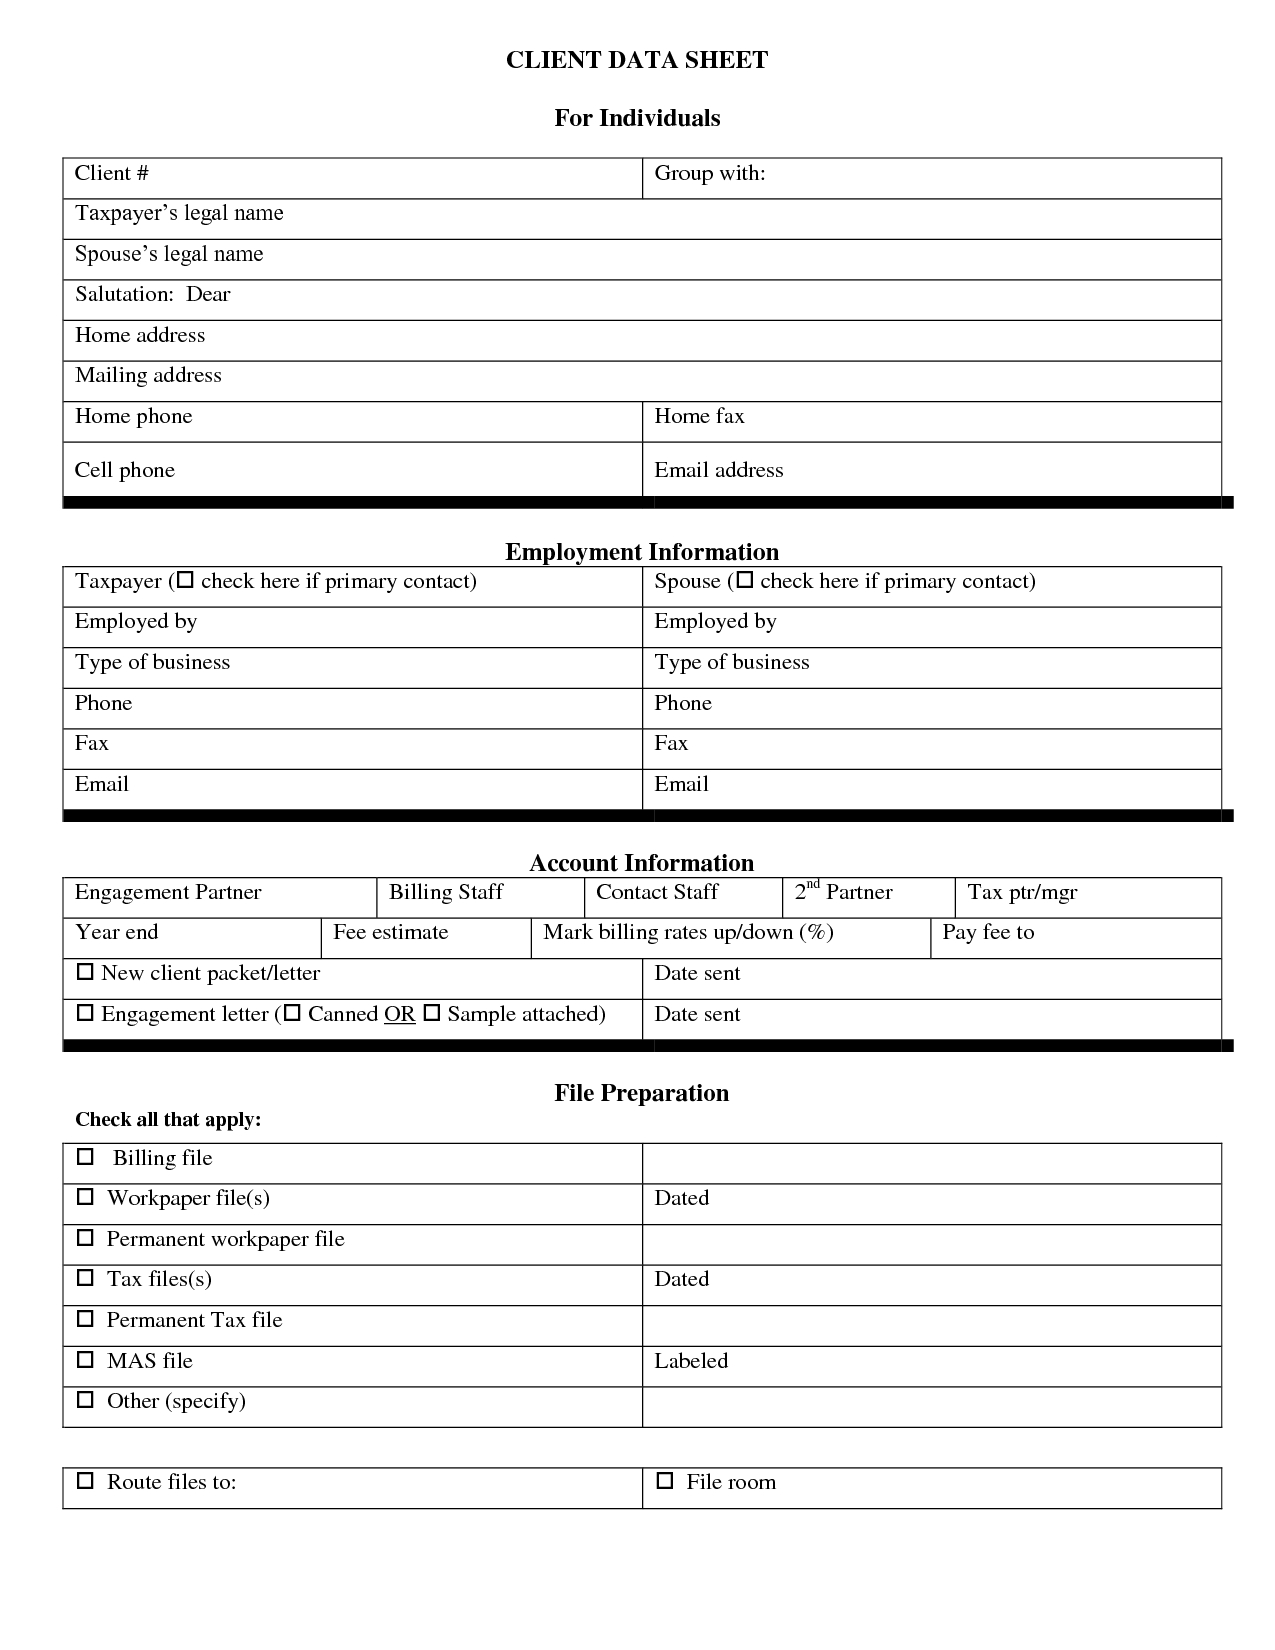 Free Personal Information Forms | Client Data Sheet For Individuals - Free Printable Data Sheets